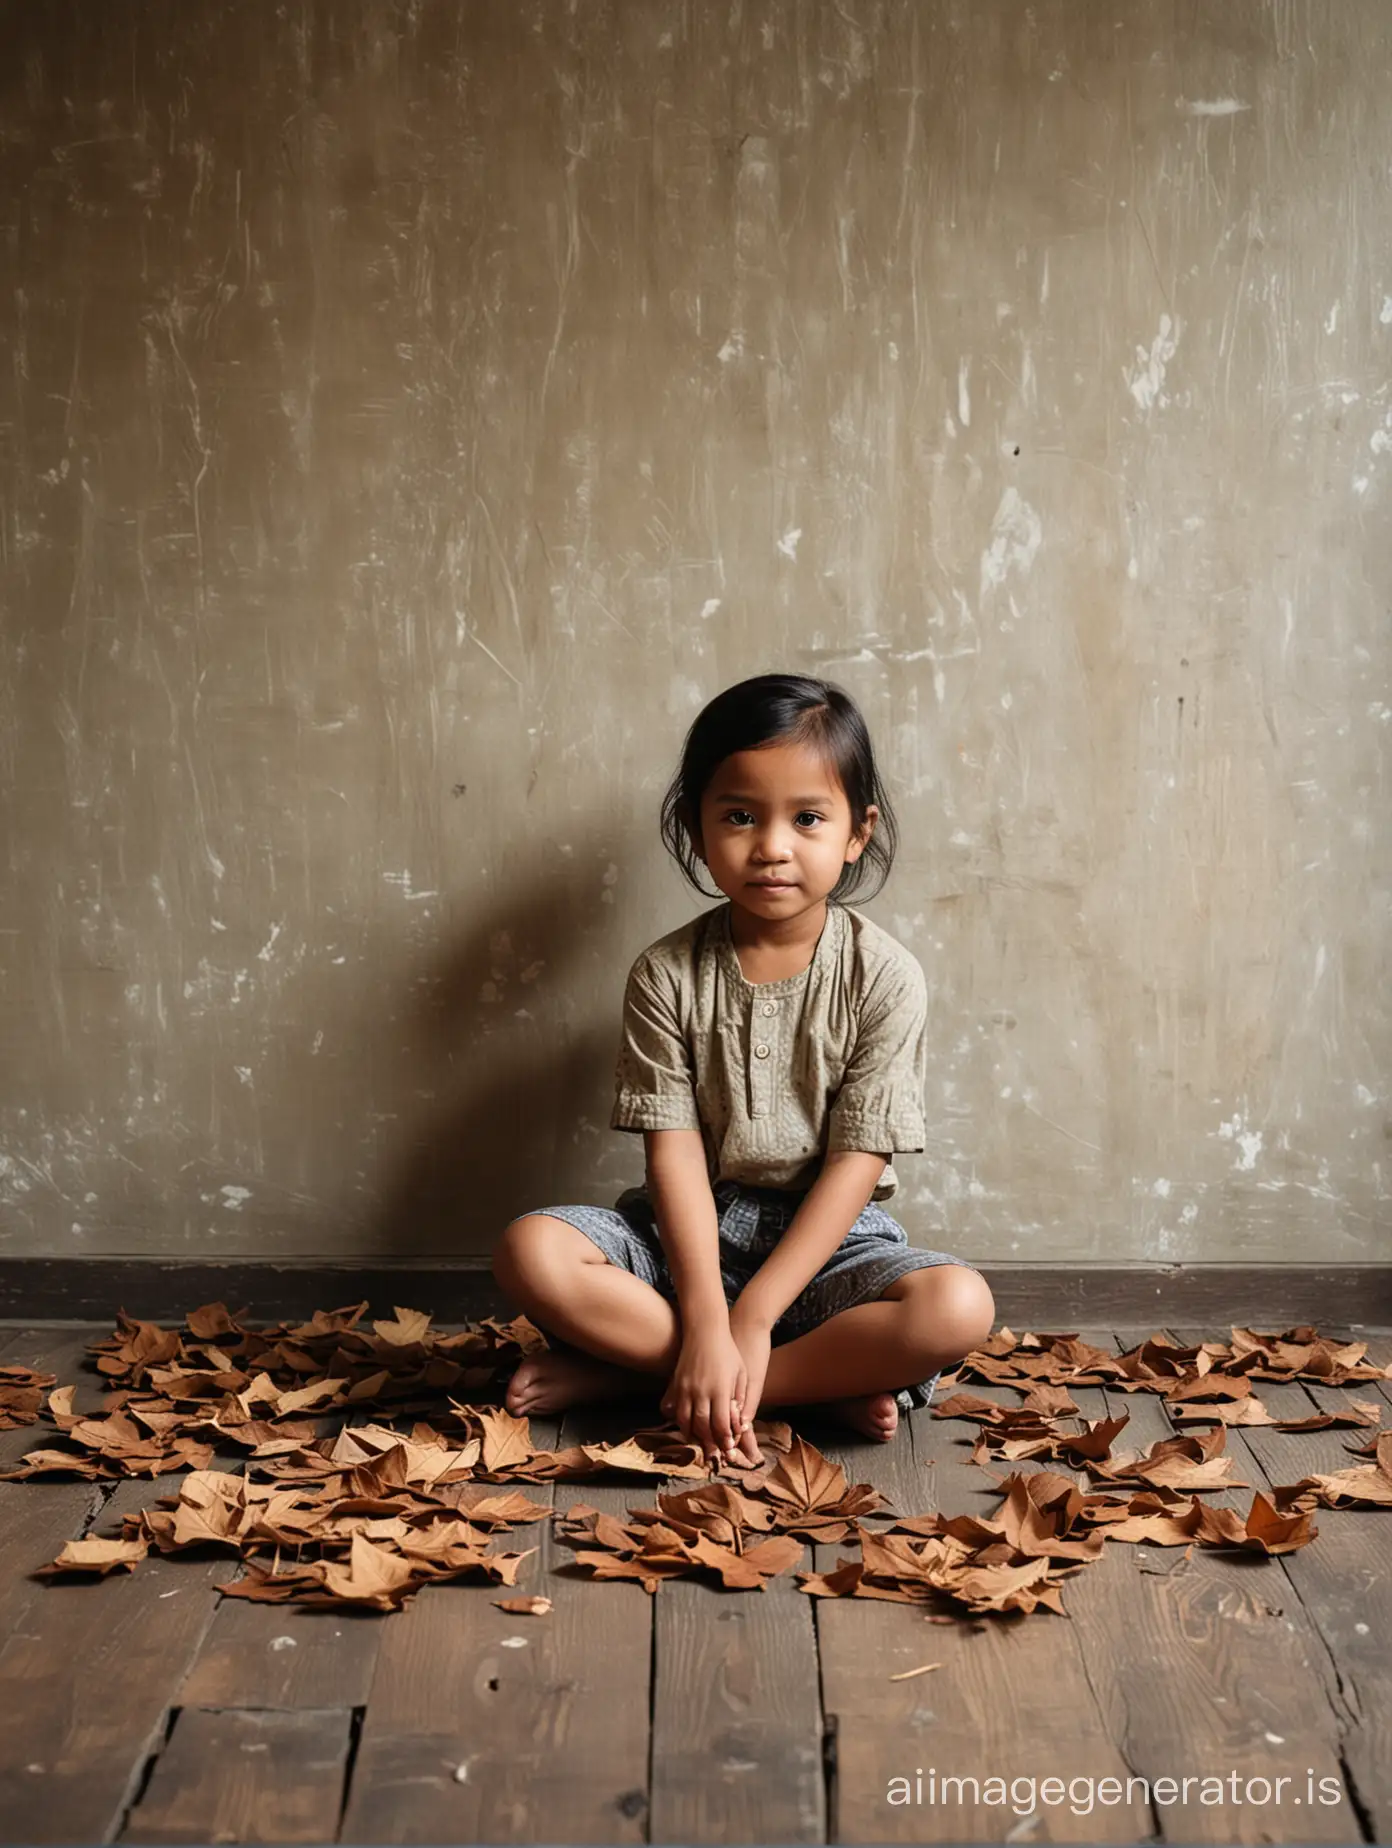 A six year old Indonesian girl sitting cross-legged on the Wood floor and there some old leaves . Wall covered with Wood. Atmosphere classic house